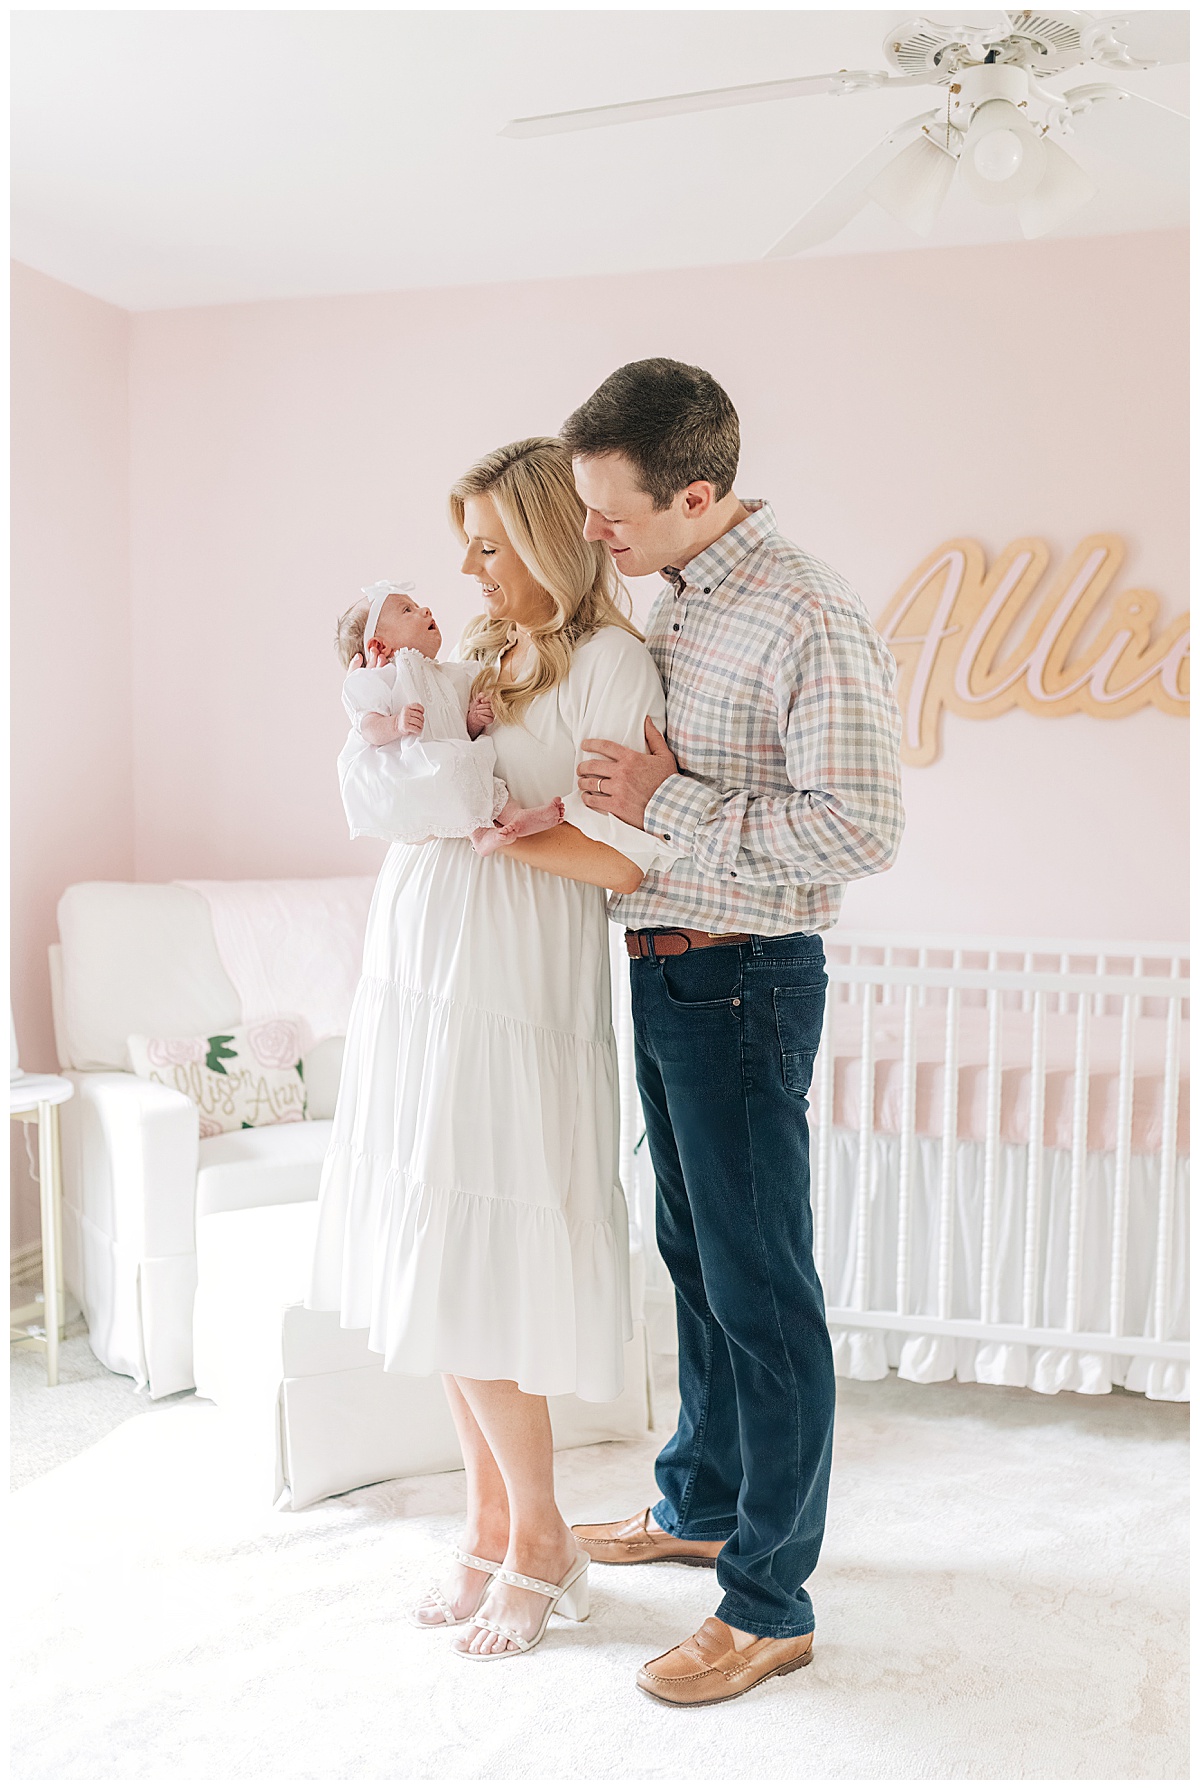 Photo of mom dad and newborn baby in nursery taken by northwest Arkansas photographer grace Starr photography 